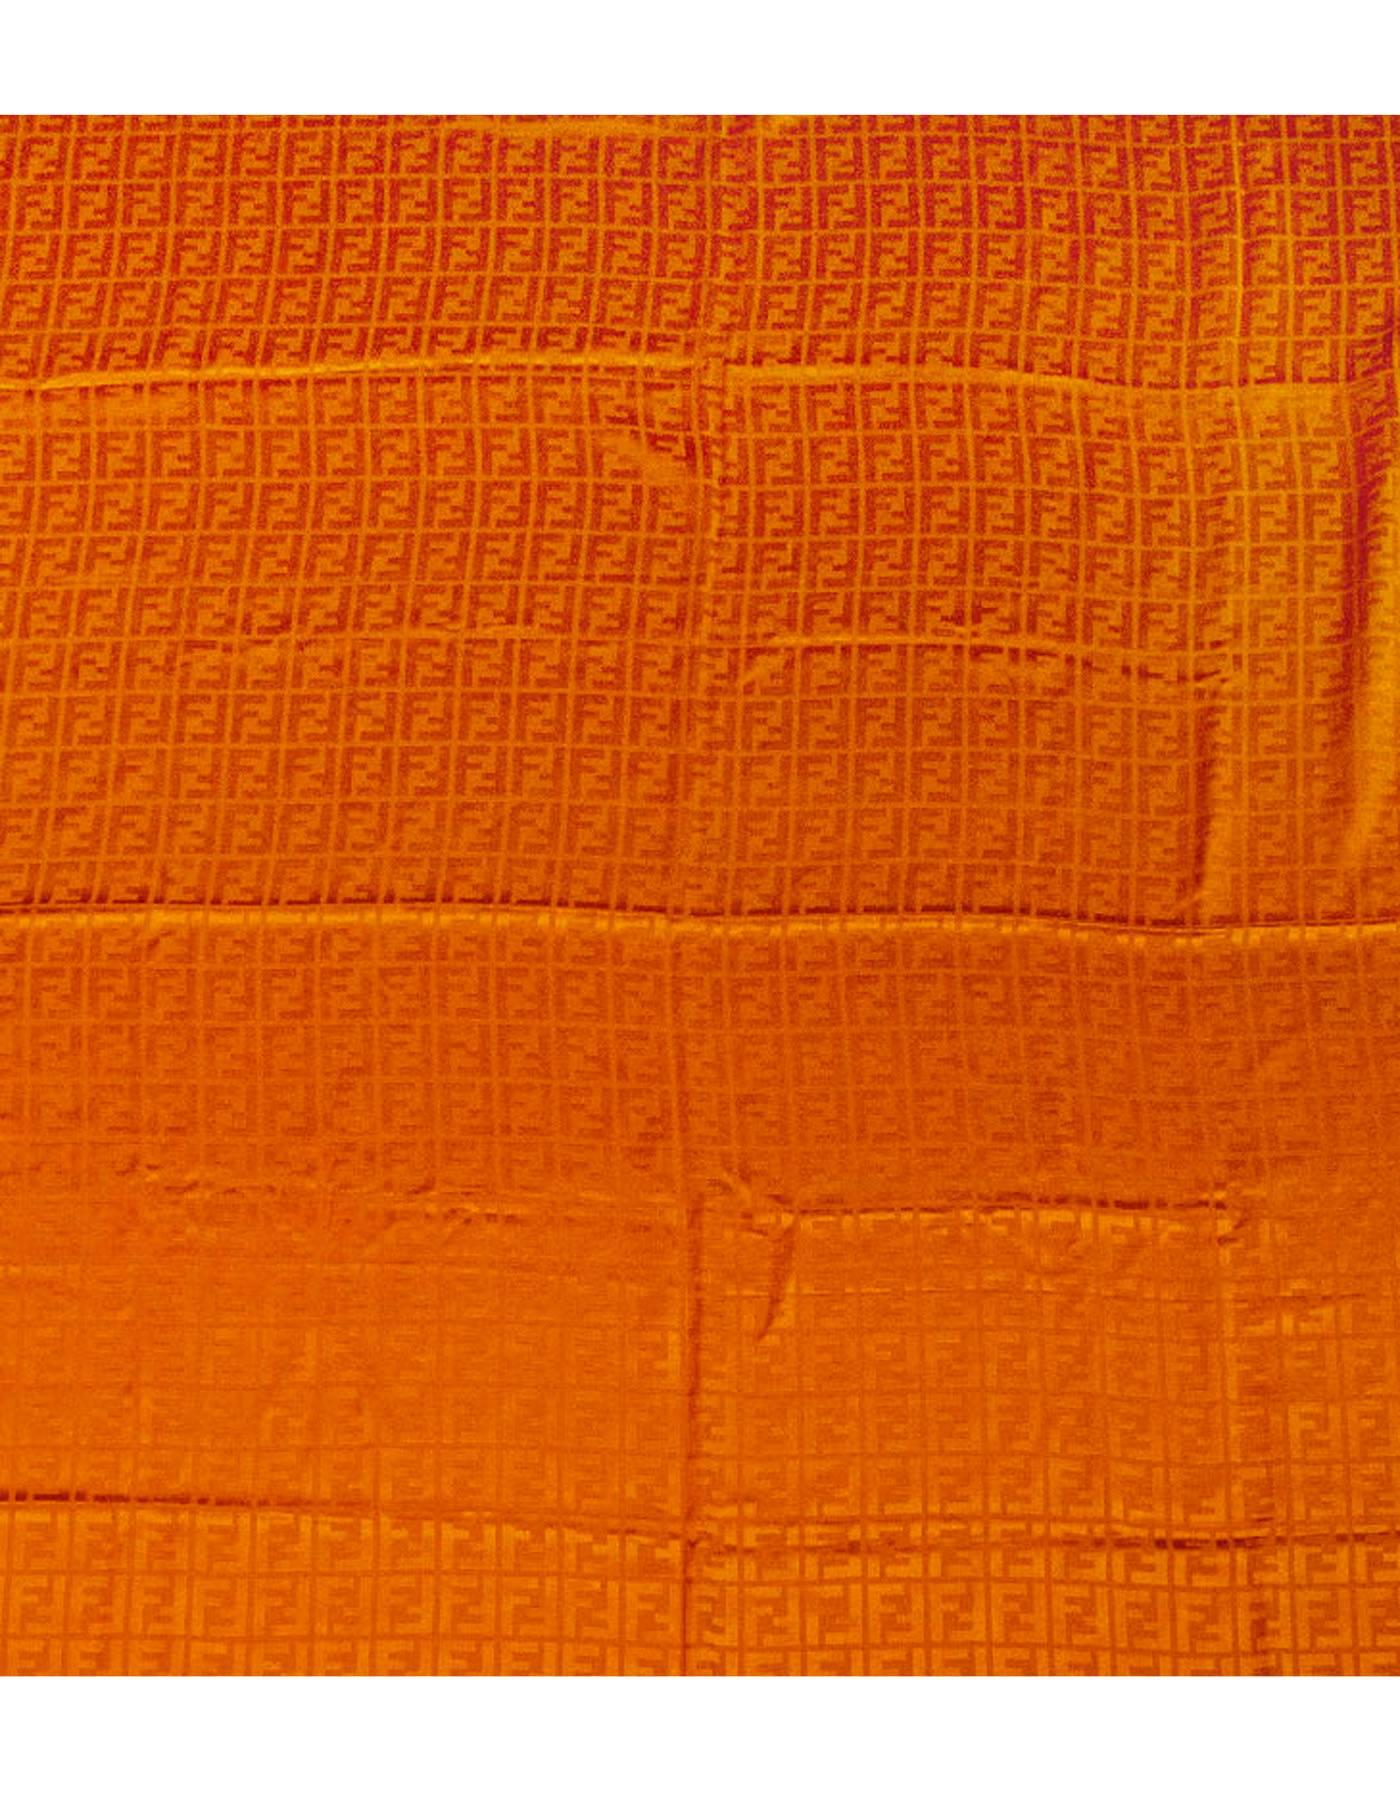 Fendi Casa Orange Zucca Throw NWT
Can be worn as a shawl

Made In: Italy
Color: Orange
Composition: 60% Silk, 40% Wool
Retail Price: $995 + tax
Overall Condition: Excellent pre-owned condition, NWT

Measurements:
Length: 33"
Width: 56"